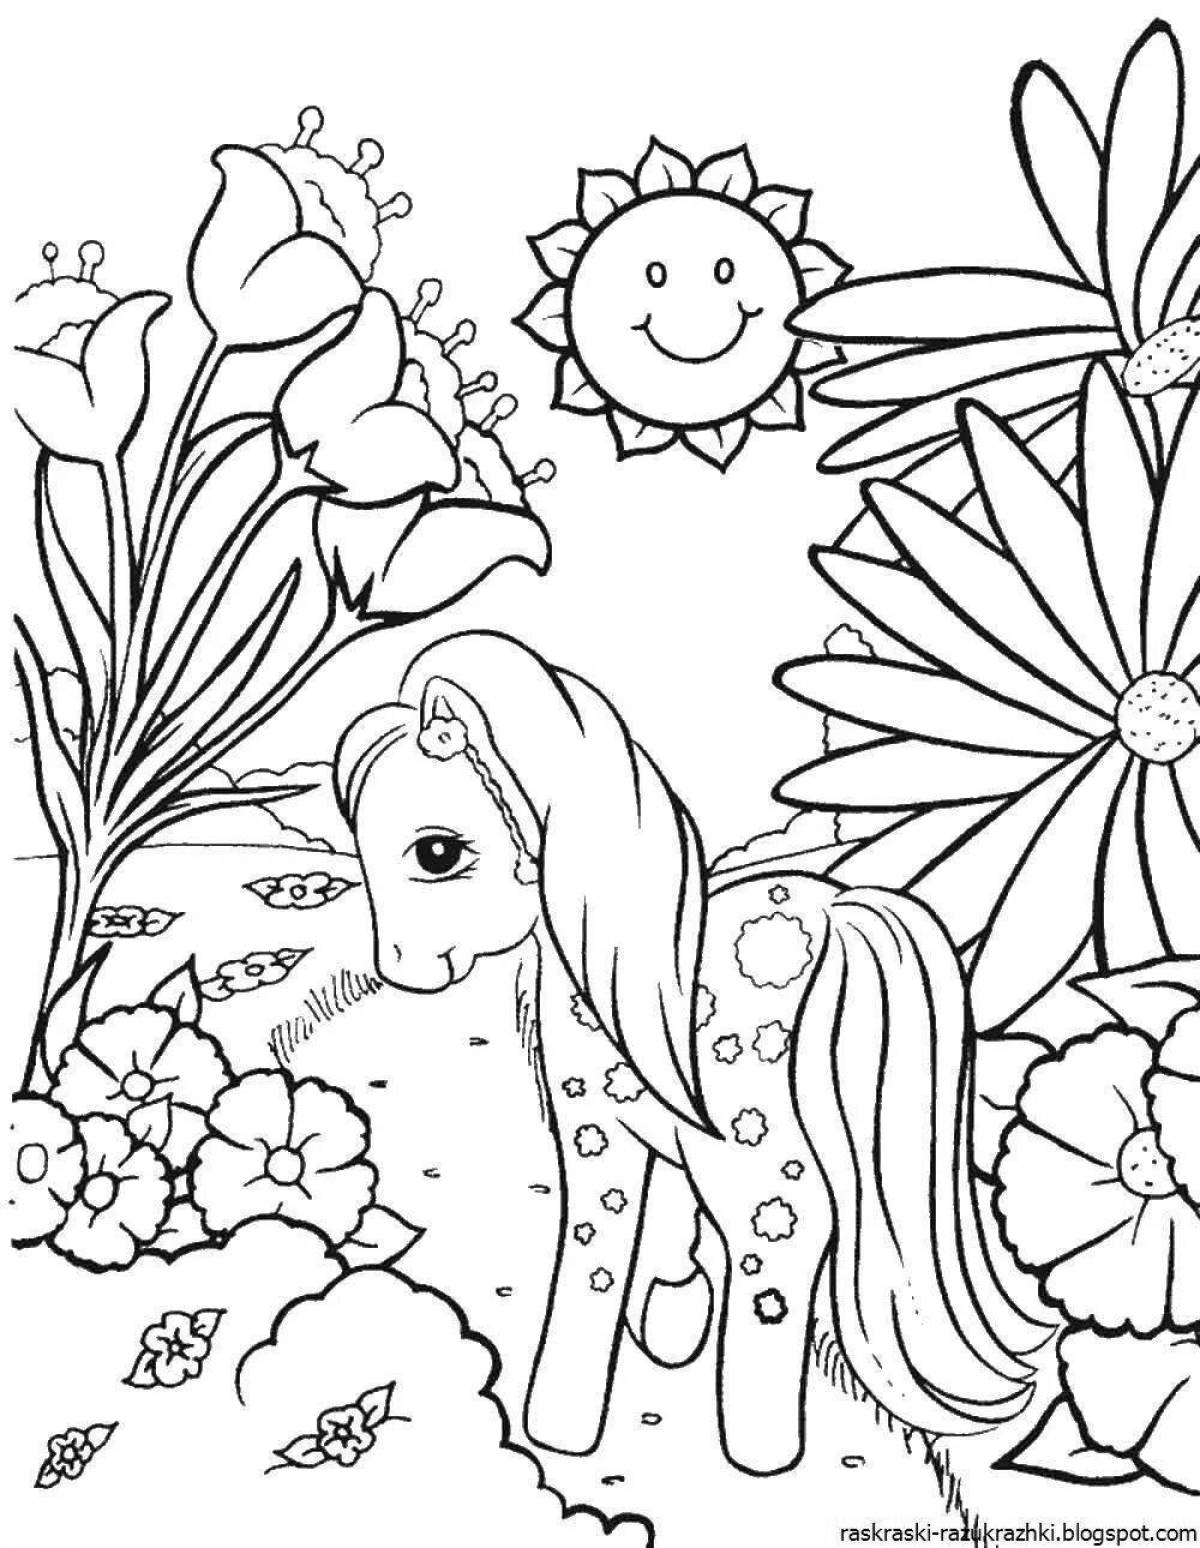 Serene nature coloring book for girls